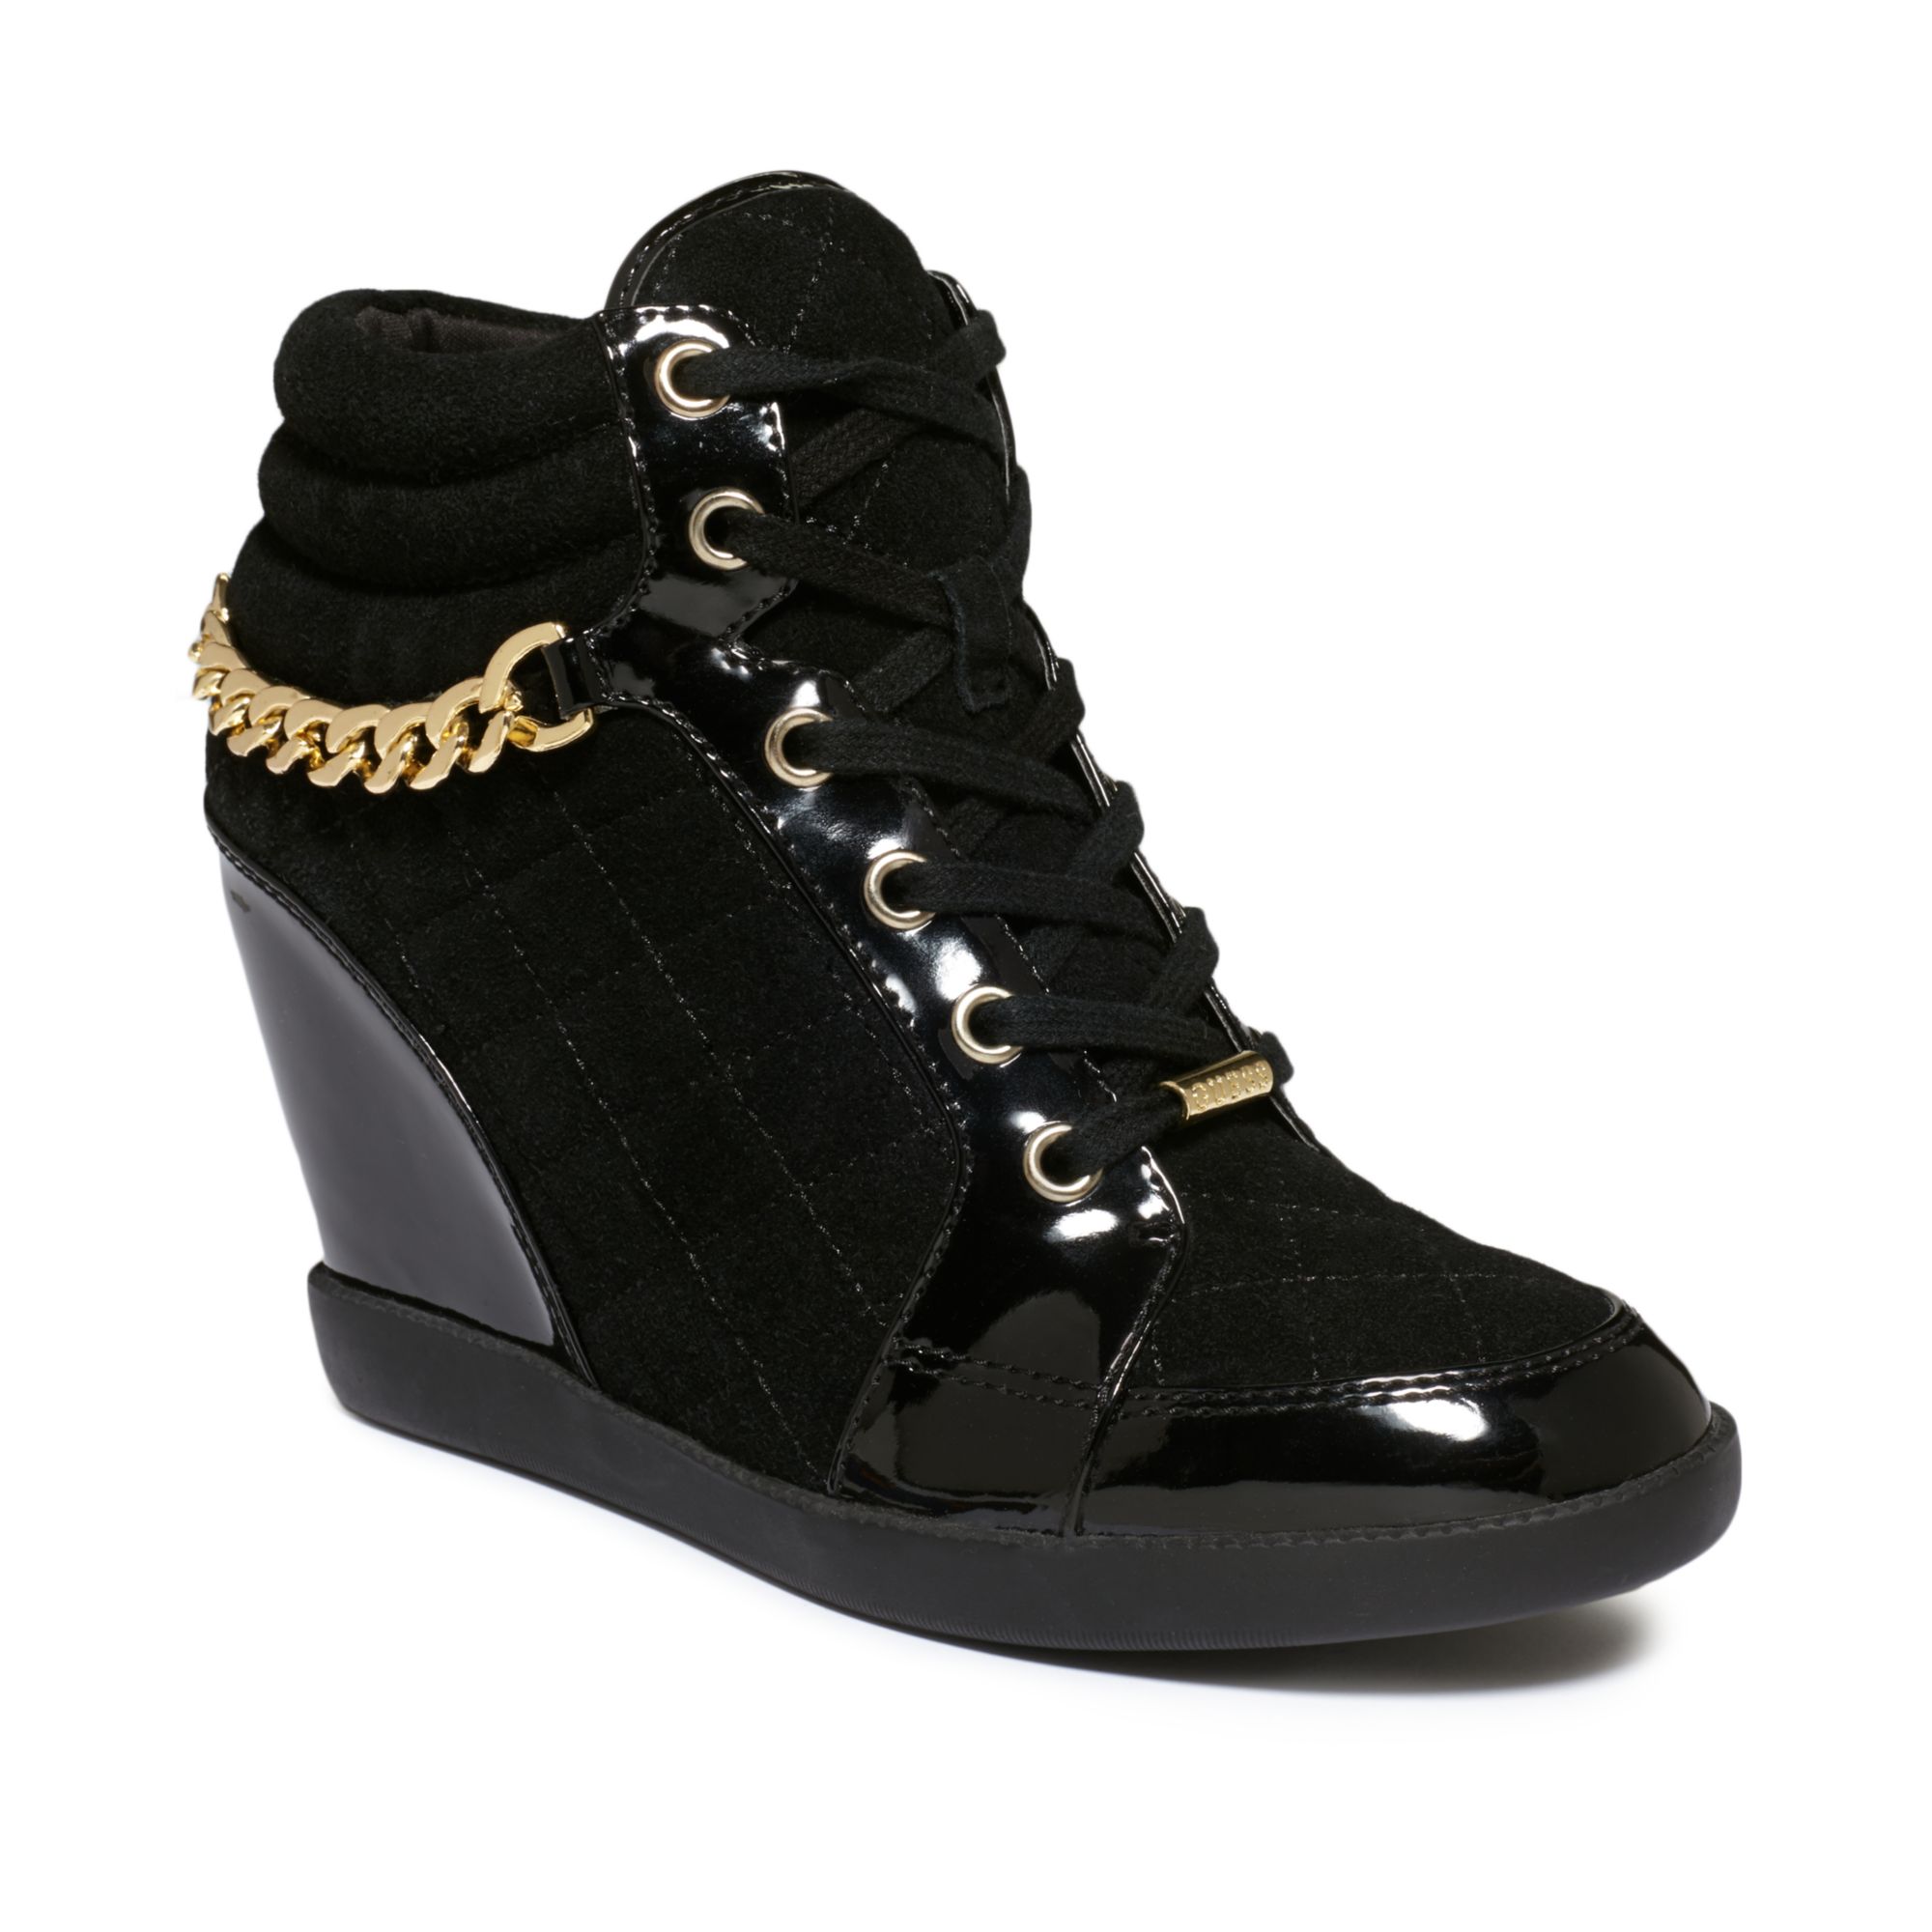 Guess Womens Shoes Hevin Quilted Wedge Sneakers in Black - Lyst